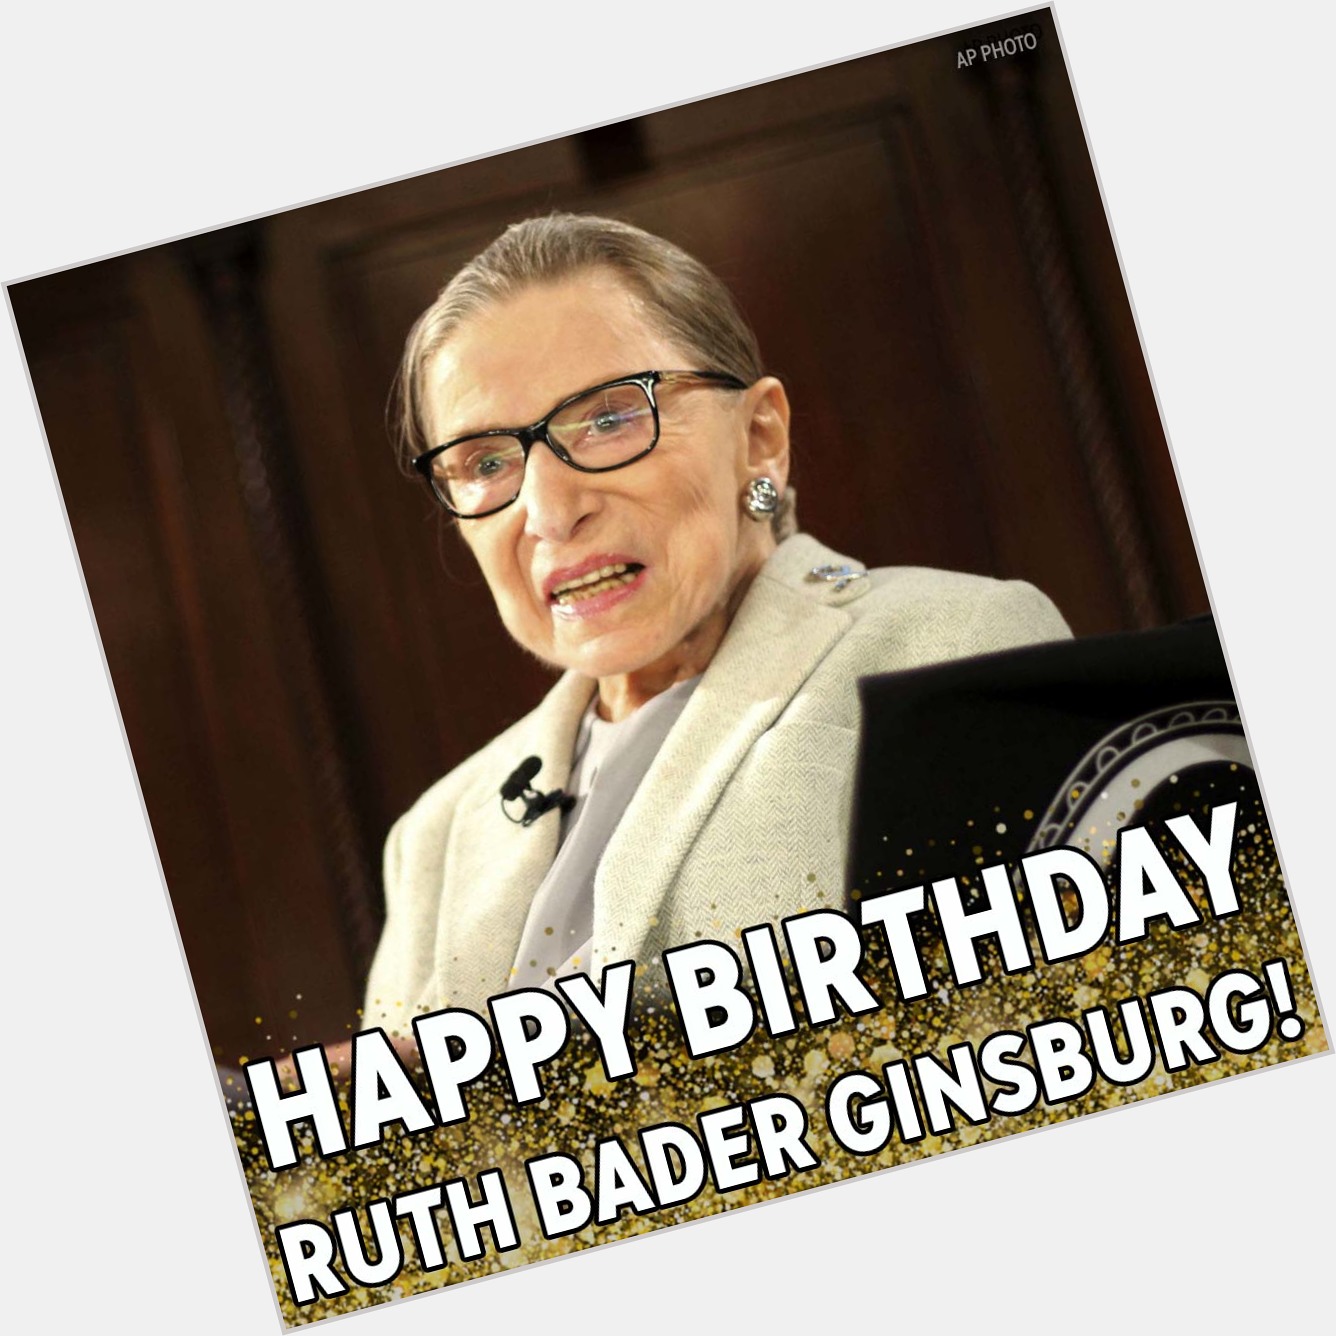 Happy Birthday, RBG! Supreme Court Justice Ruth Bader Ginsburg turns 86 today. 